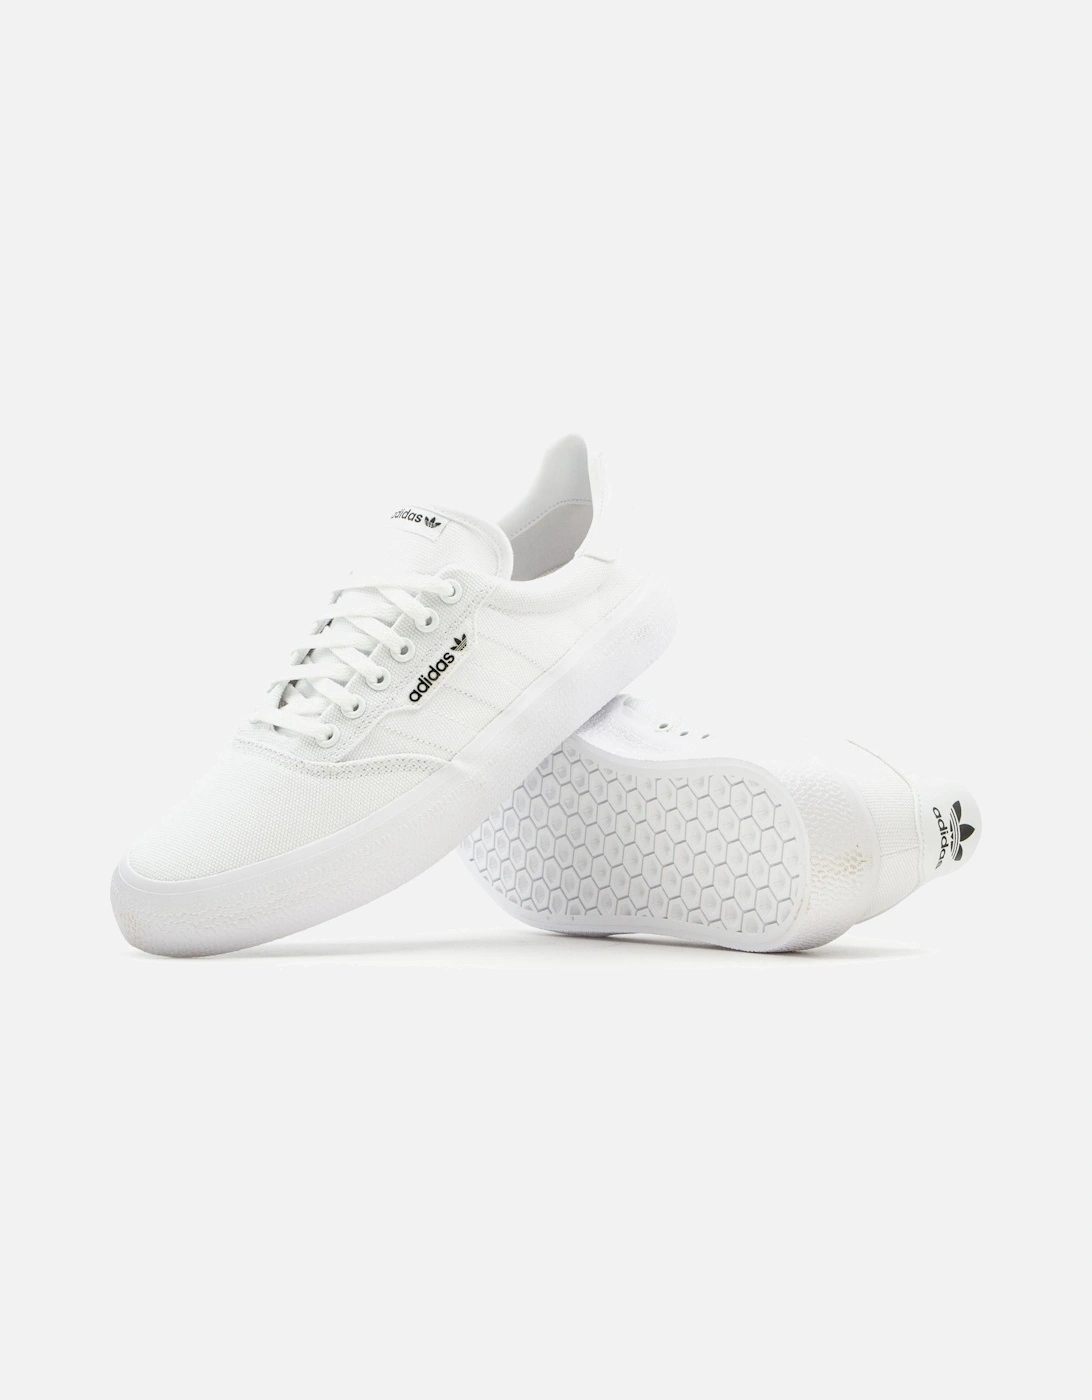 3MC Shoes - FTW White/FTW White/Gold, 4 of 3